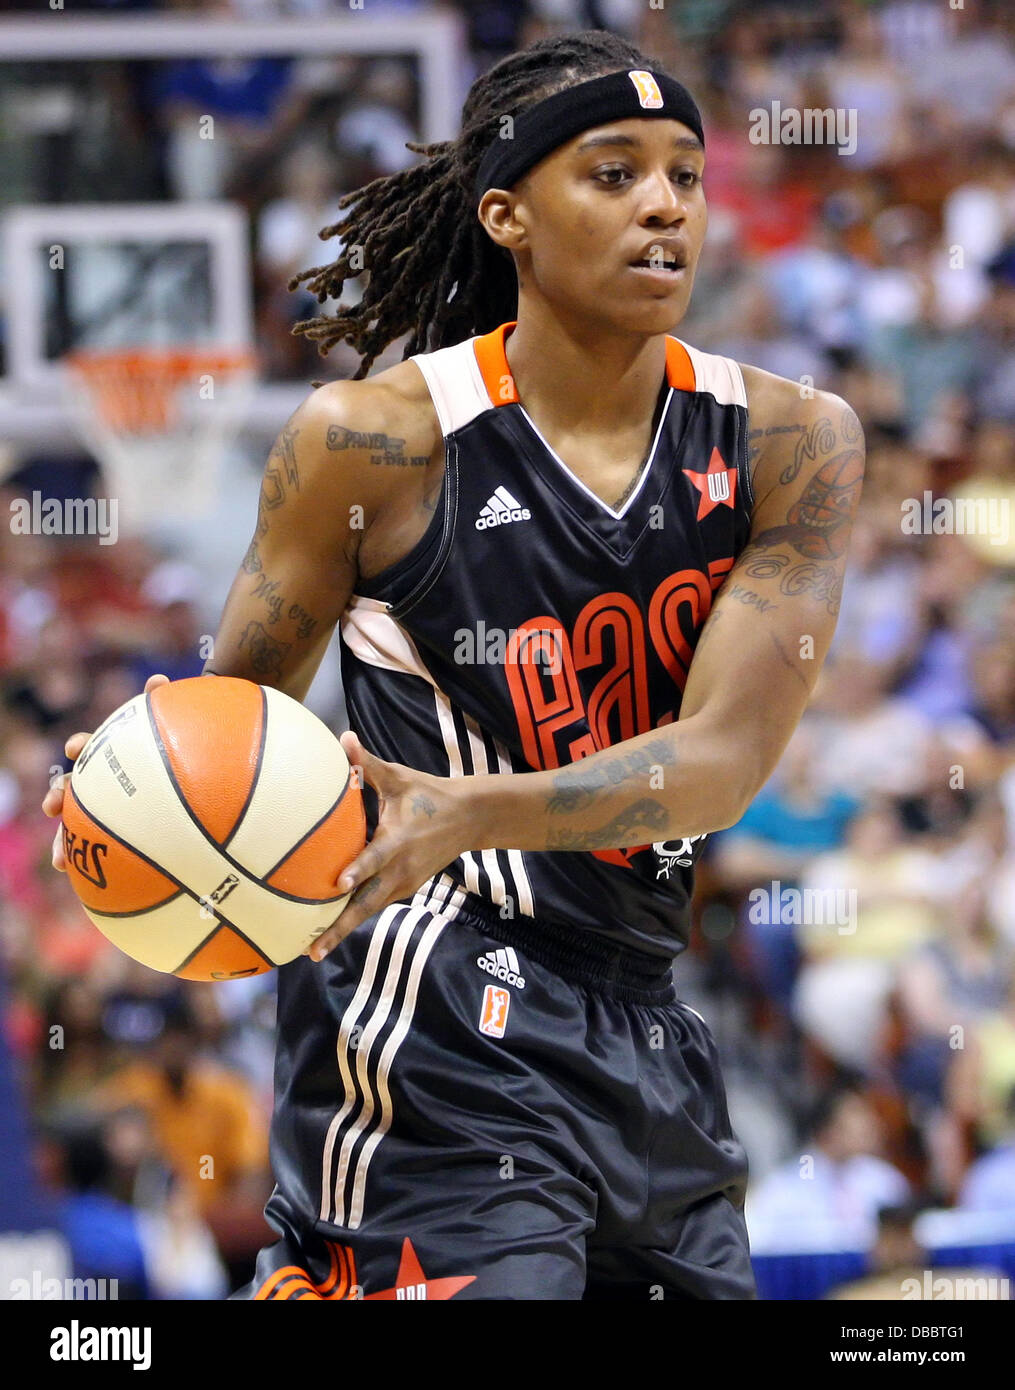 Uncasville, Connecticut, USA. 27th July, 2013. Eastern Conference guard Shavonte Zellous (1) of the Indiana Fever in action during the 2013 WNBA All-Star game at Mohegan Sun Arena. The Western Conference defeated the East 102-98. Anthony Nesmith/CSM/Alamy Live News Stock Photo